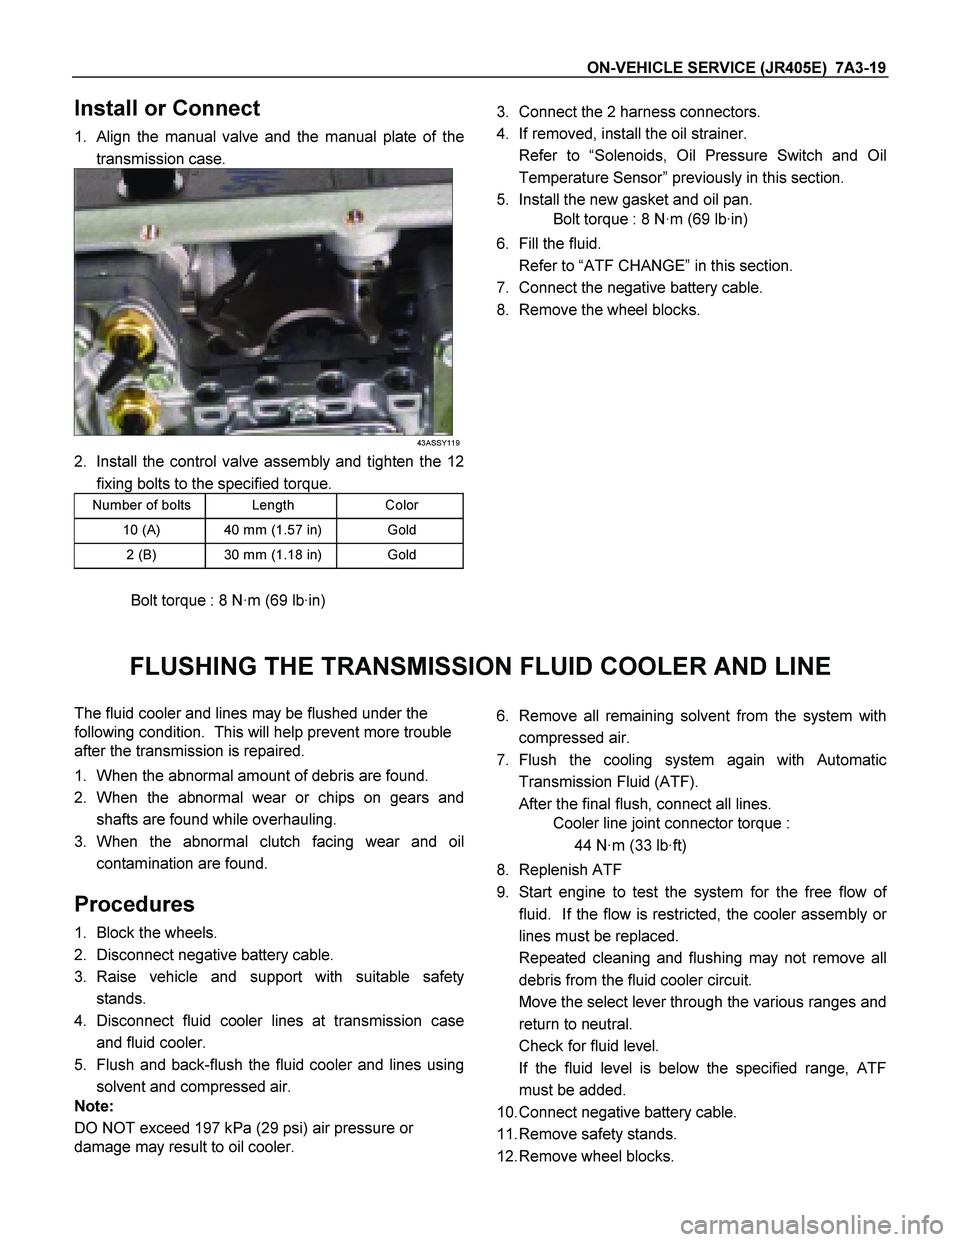 ISUZU TF SERIES 2004  Workshop Manual ON-VEHICLE SERVICE (JR405E)  7A3-19 
Install or Connect 
1.  Align the manual valve and the manual plate of the
transmission case. 
43ASSY119
2.  Install the control valve assembly and tighten the 12
